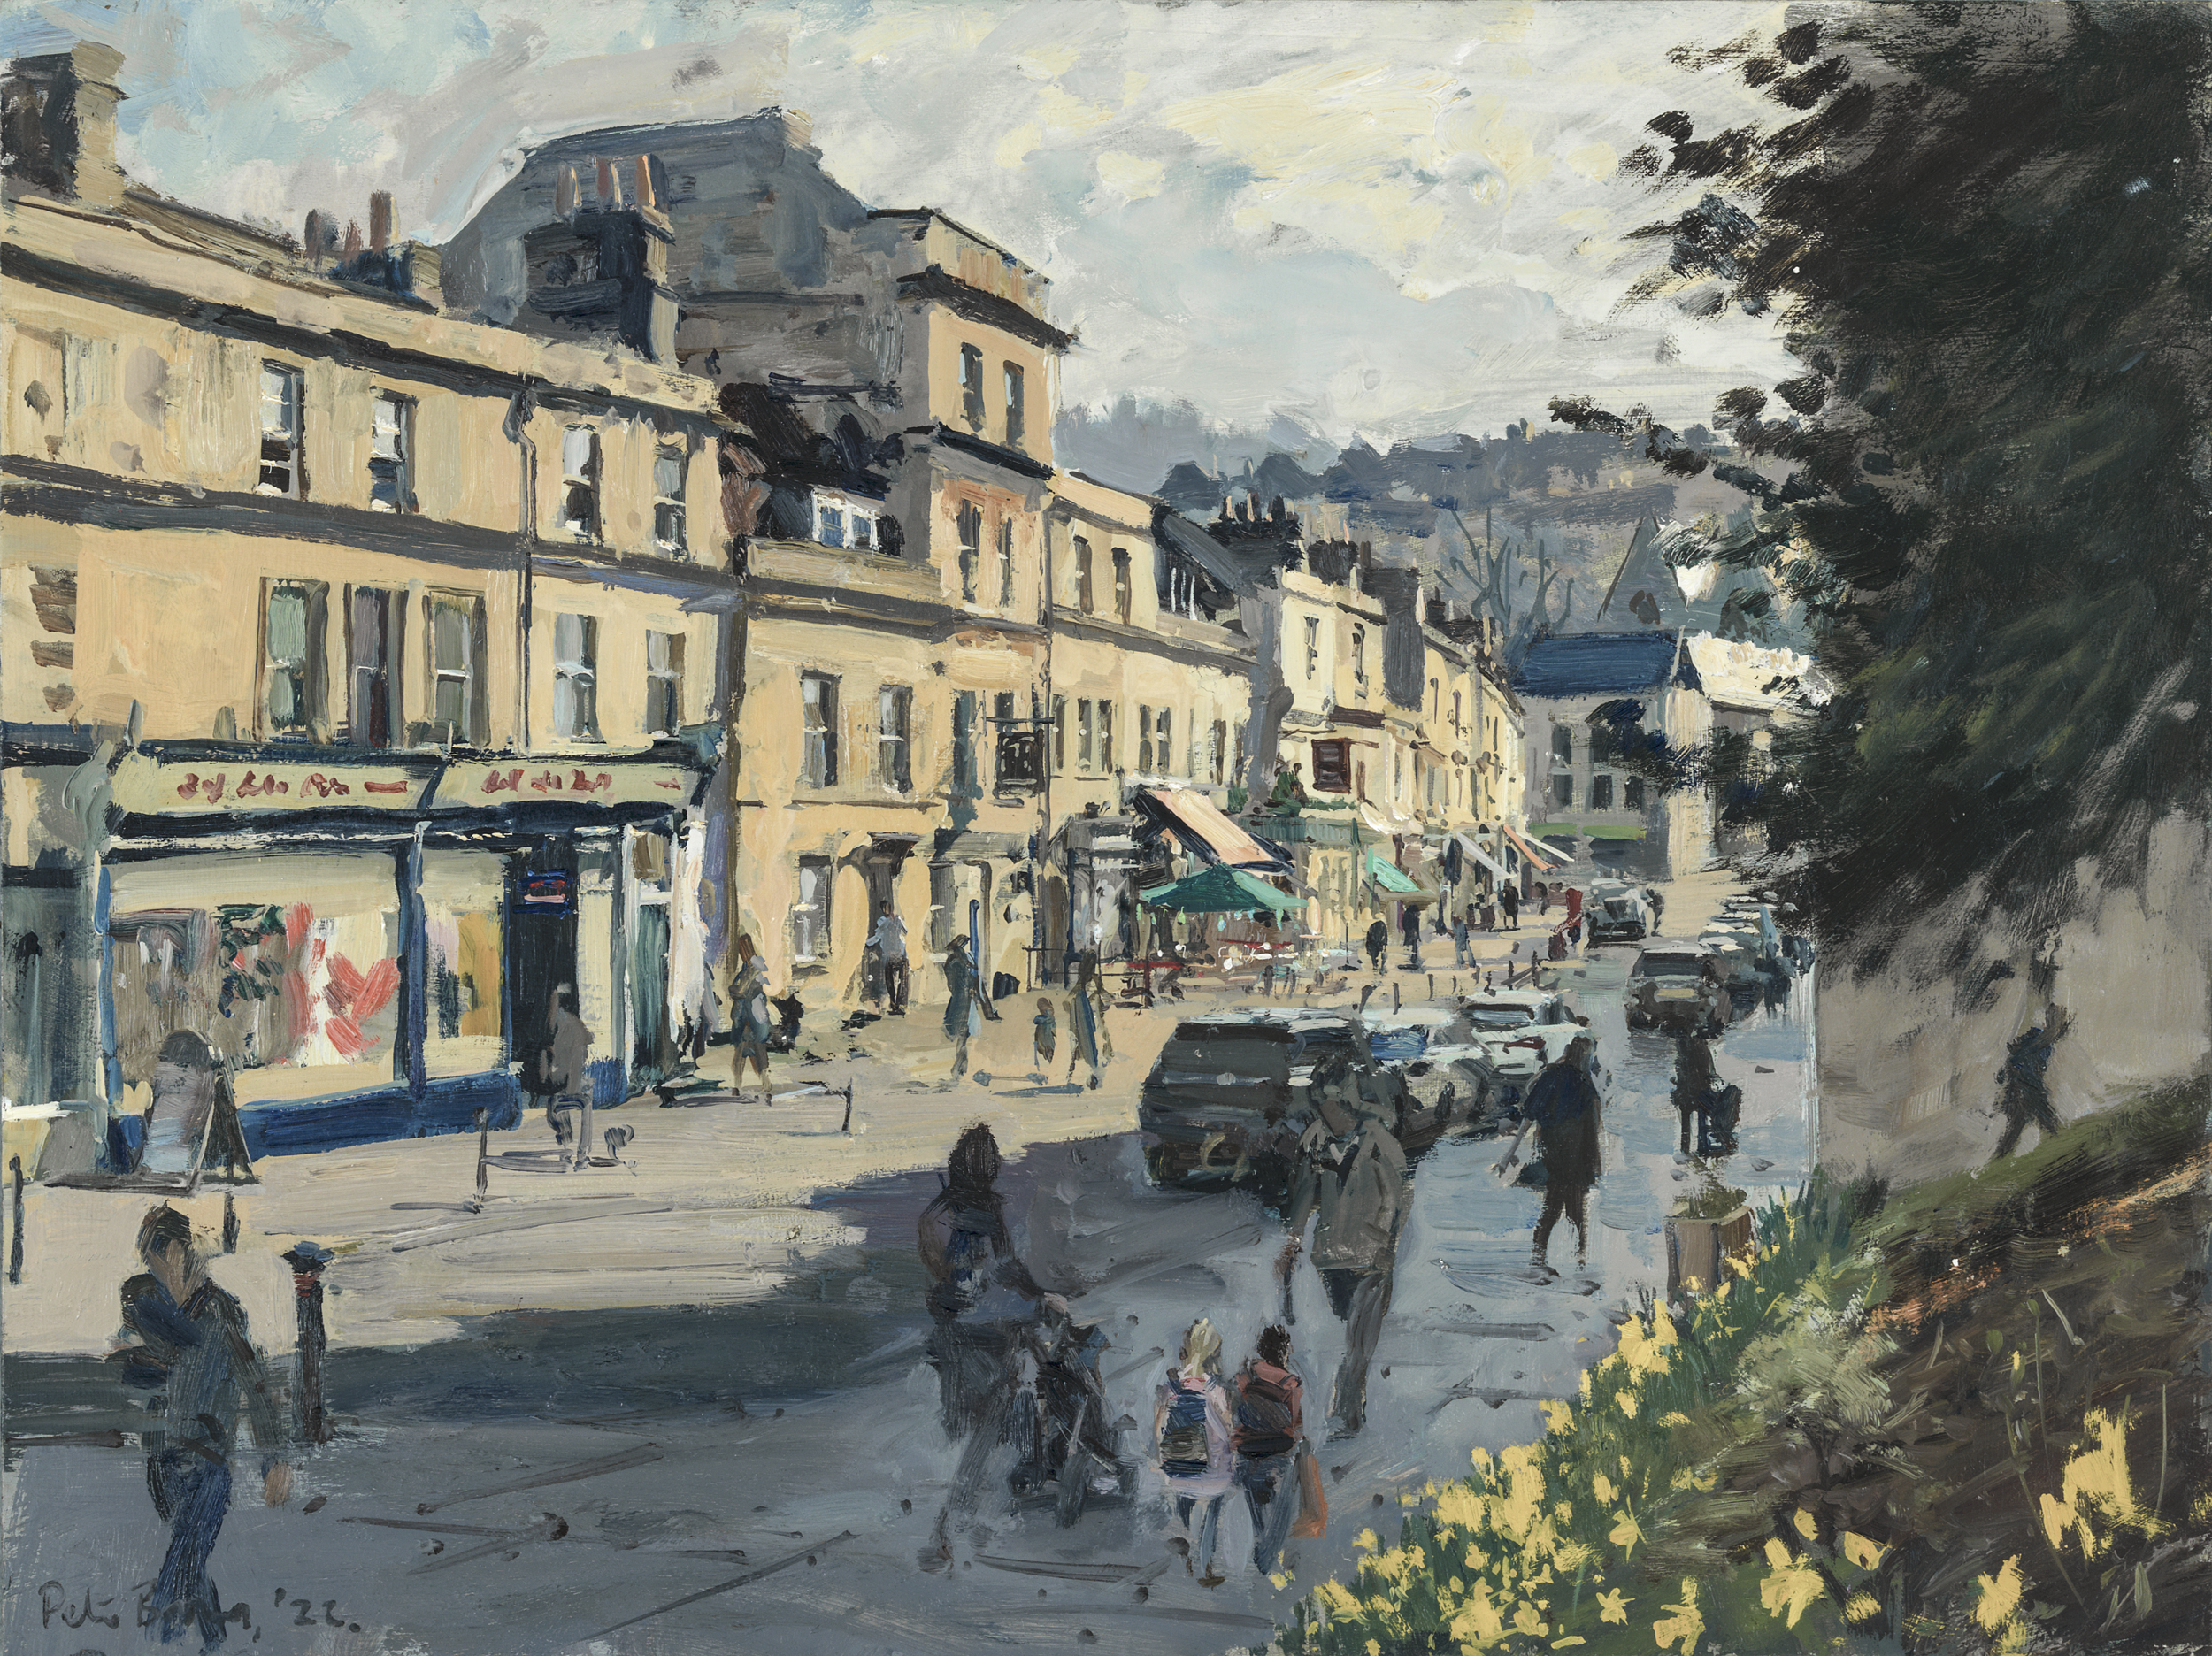 Image: Morning, Widcombe Parade from the Bank by Peter Brown, 2022